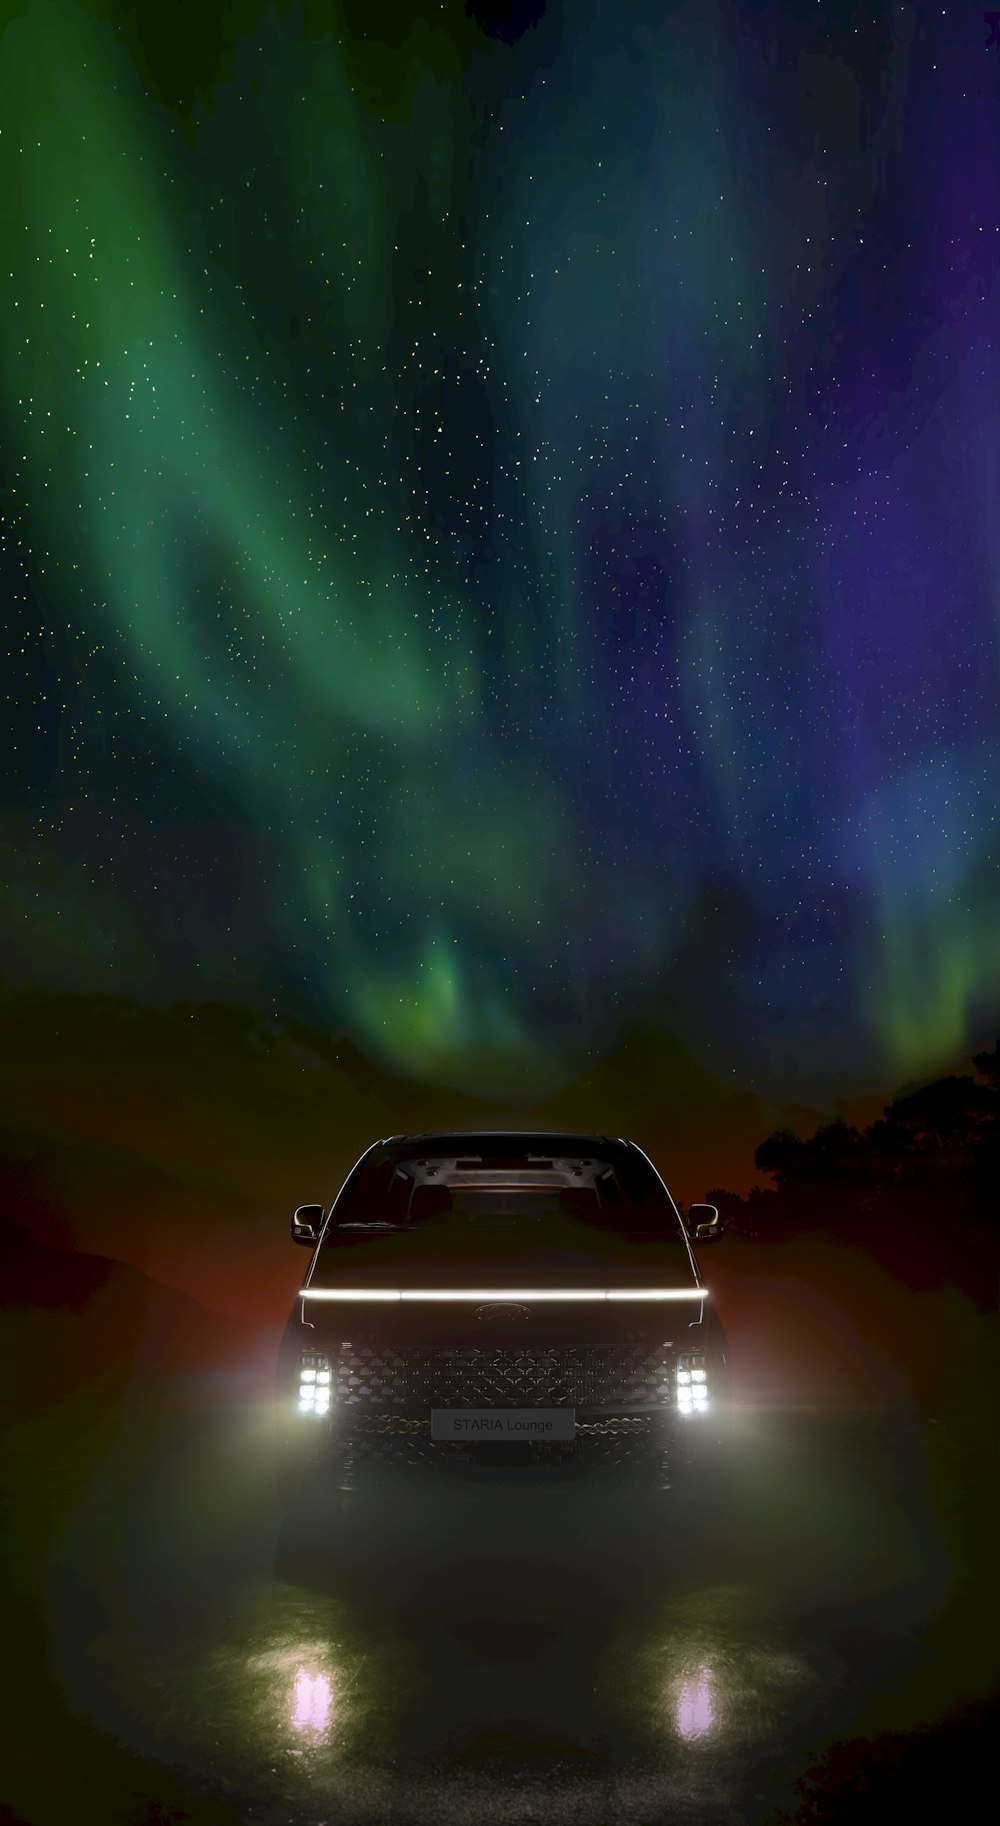 a car in front of a green aurora